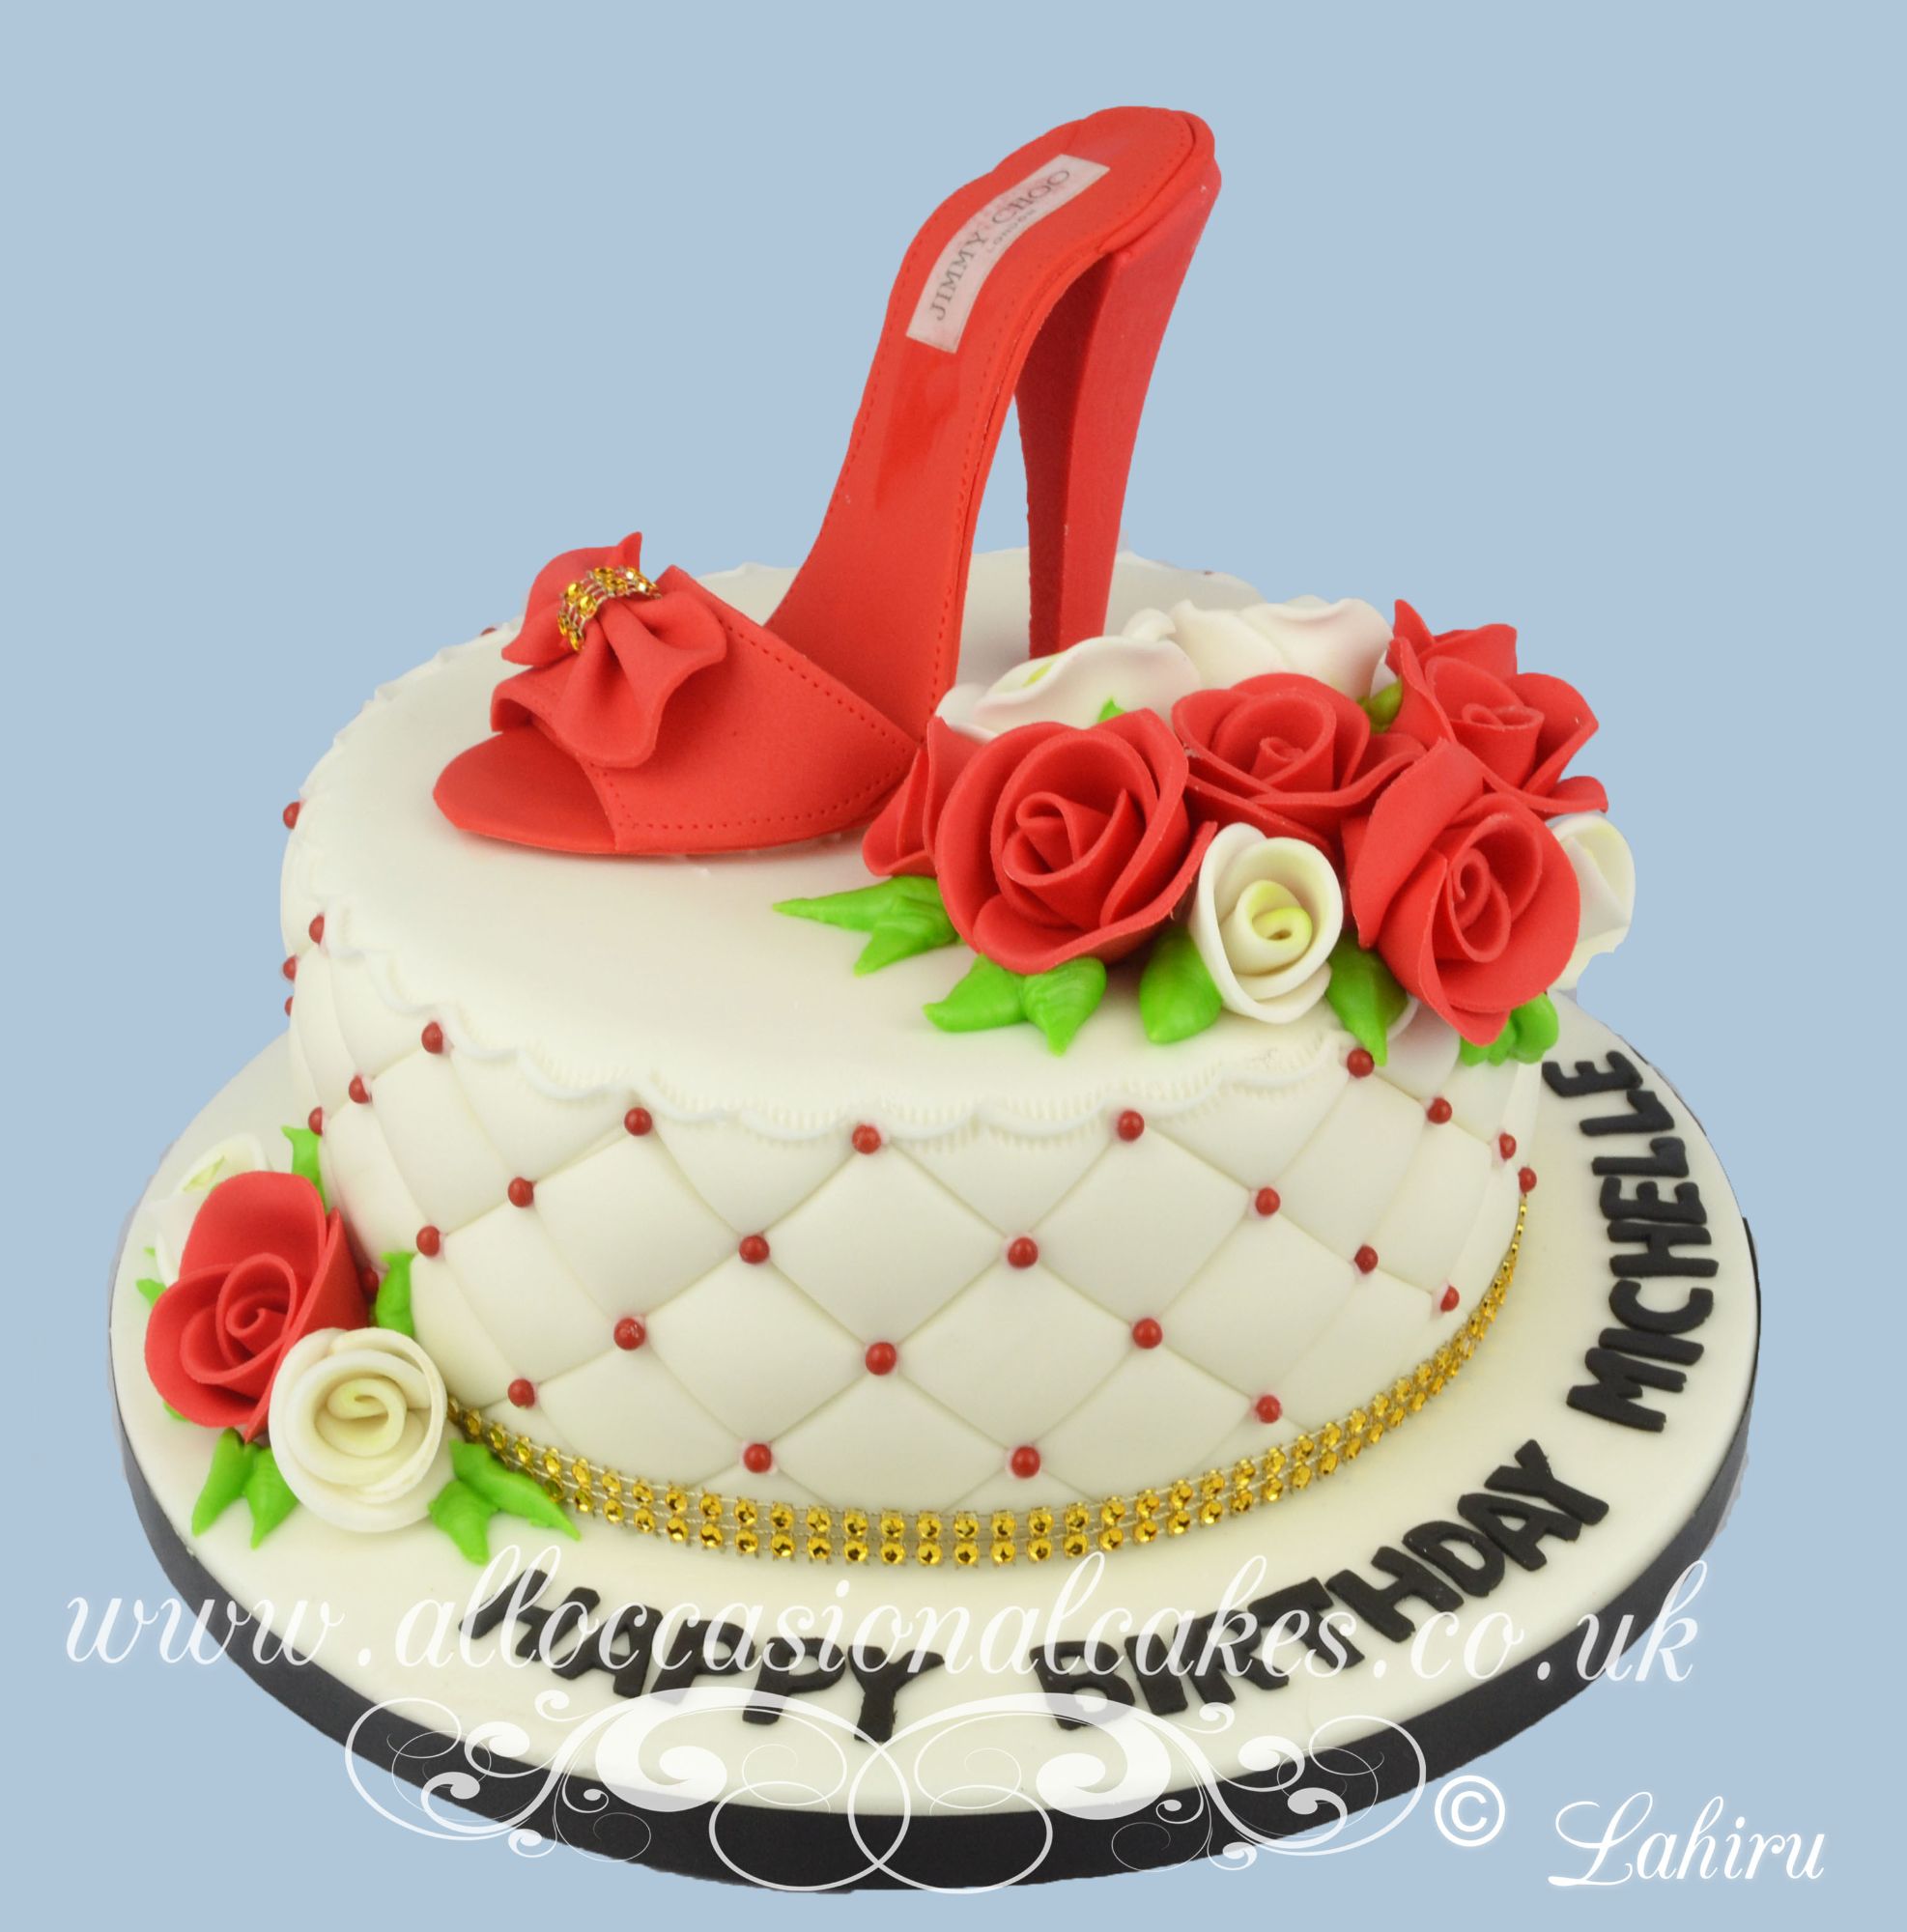 Adult Birthday Cake Pictures-The Boarding House-cake decorating supplies,  bakery packaging, candy supplies, baking supplies